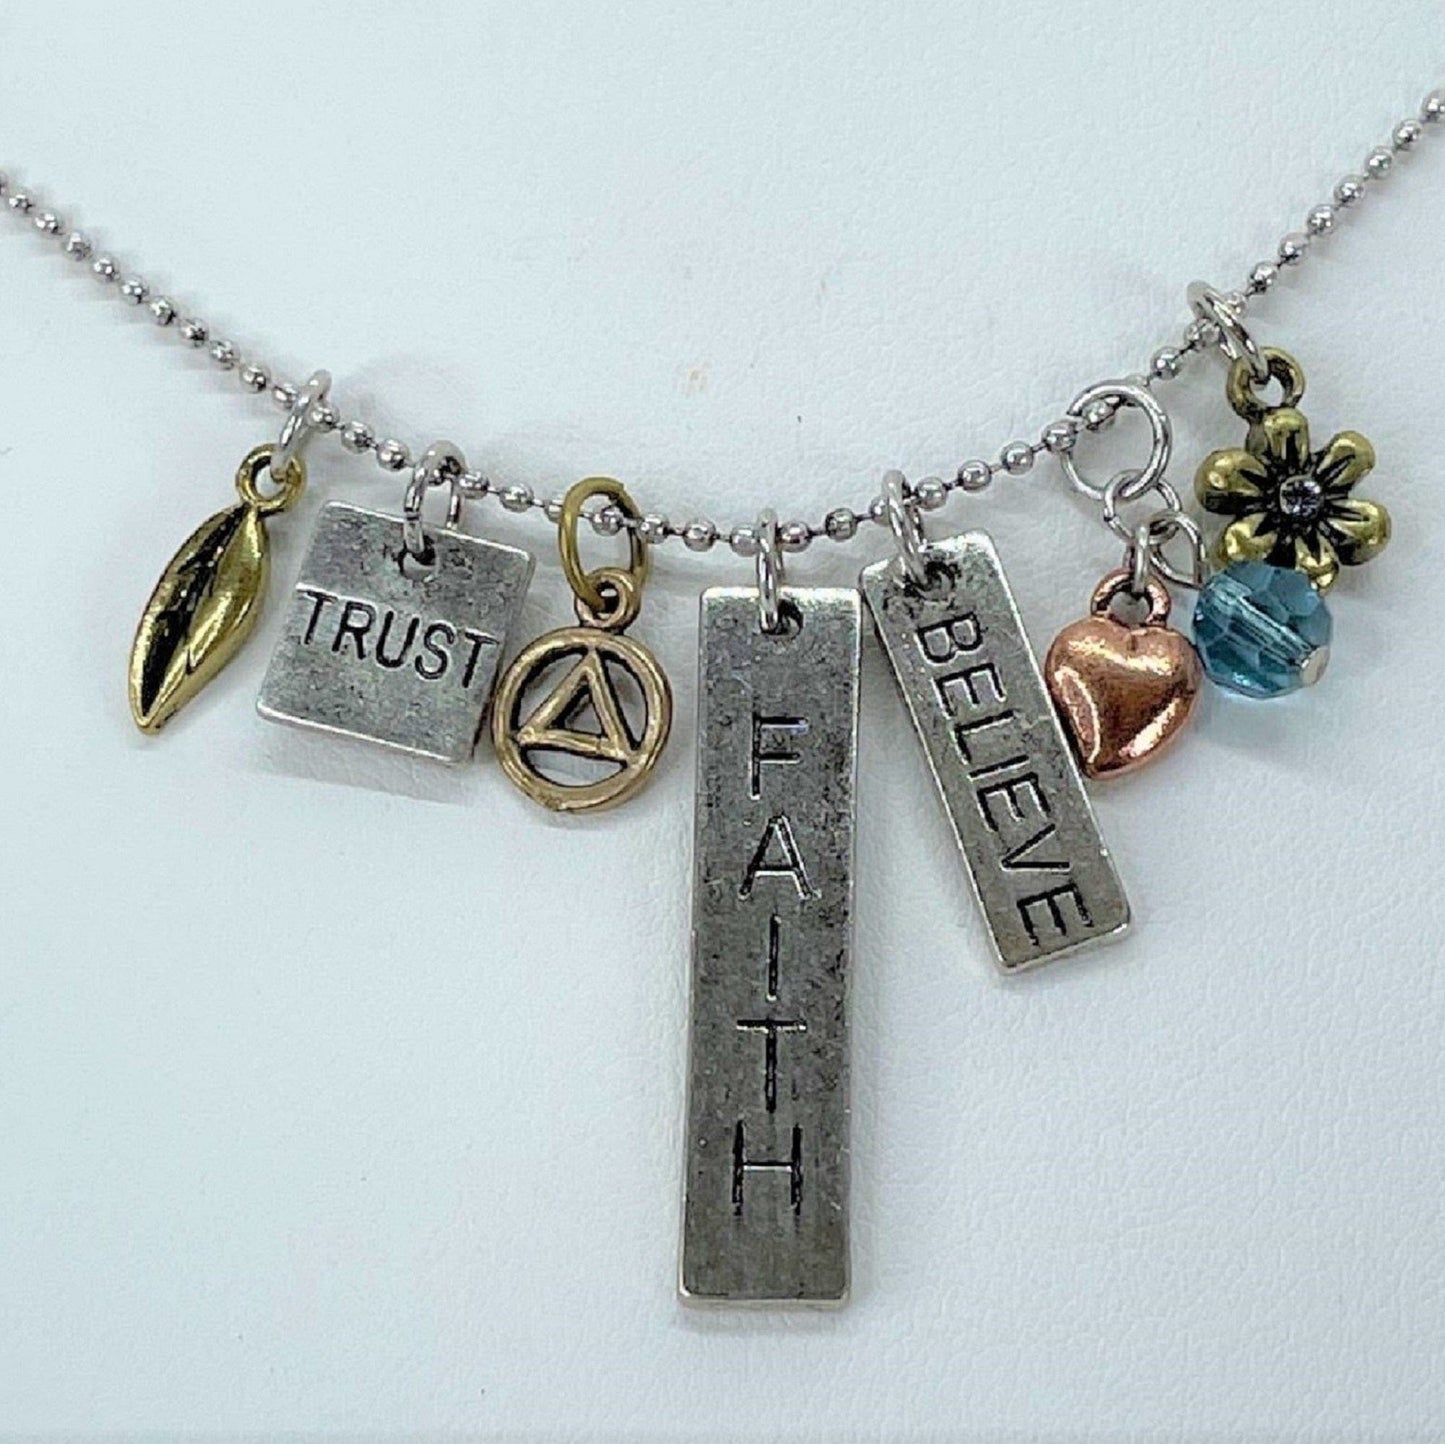 Trust-Faith-Believe Bar Necklace By Recovery Matters